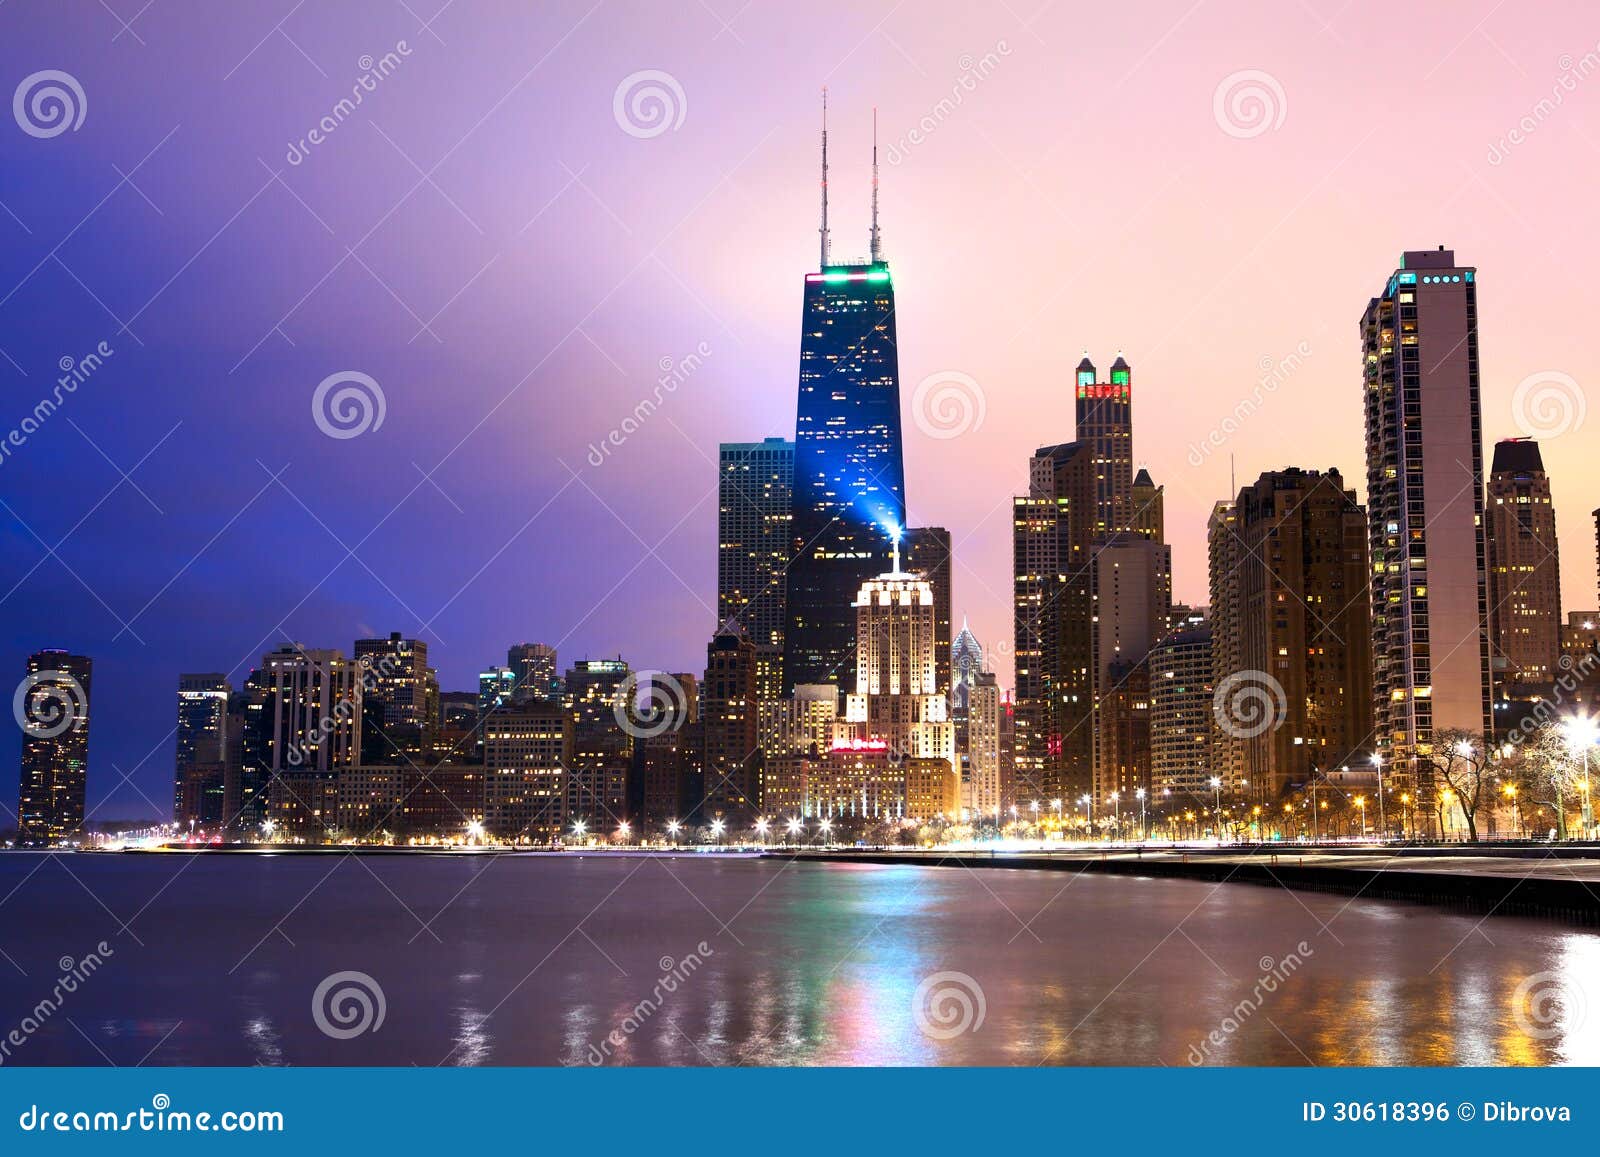 chicago waterfront